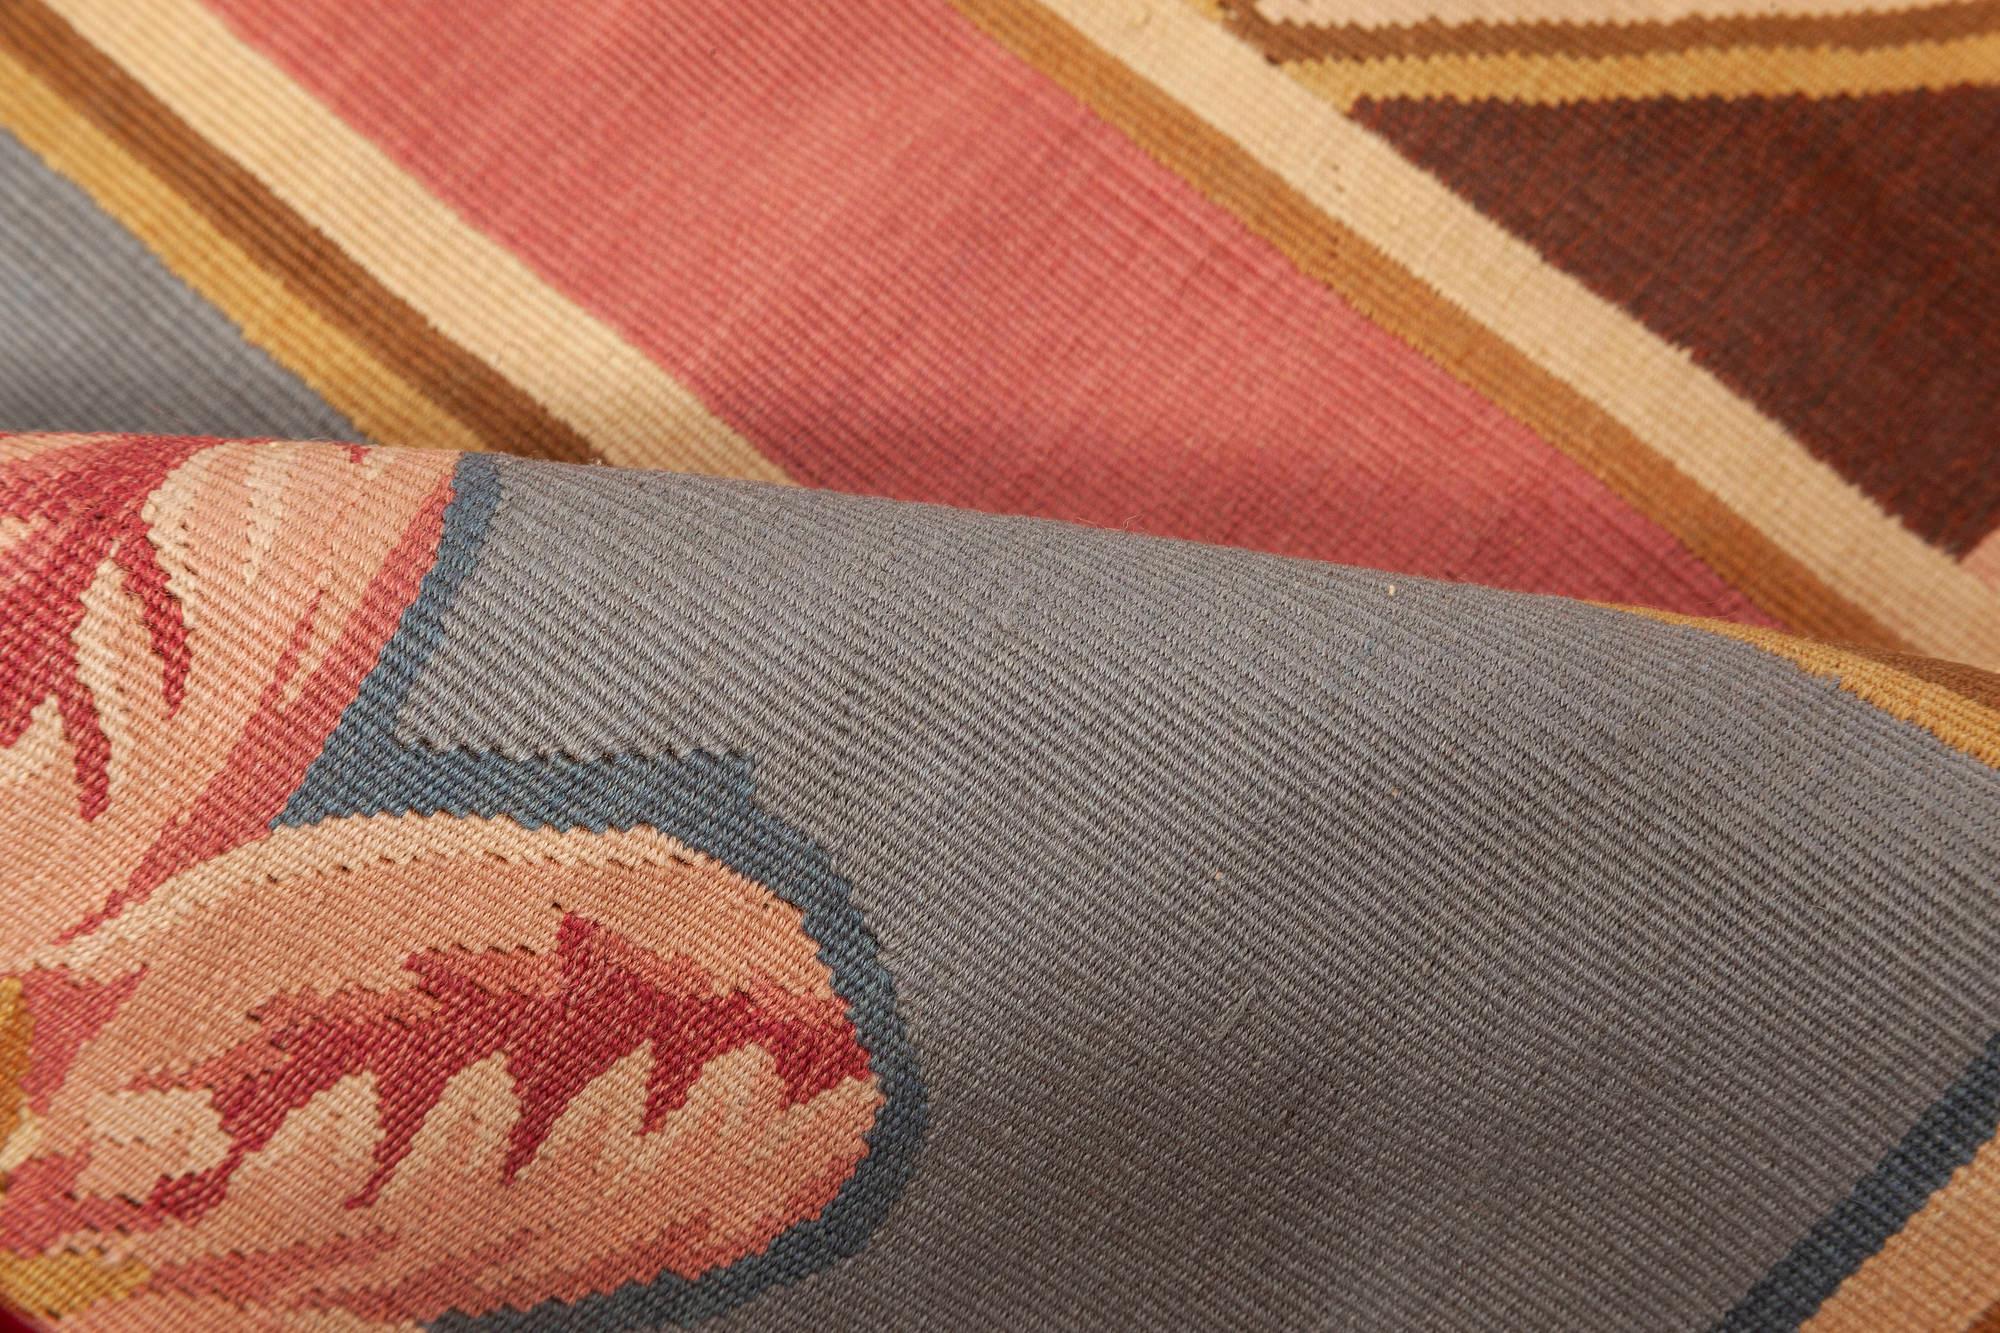 Contemporary Aubusson design rug in blue, brown, green, and pink by Doris Leslie Blau.
Size: 12'0